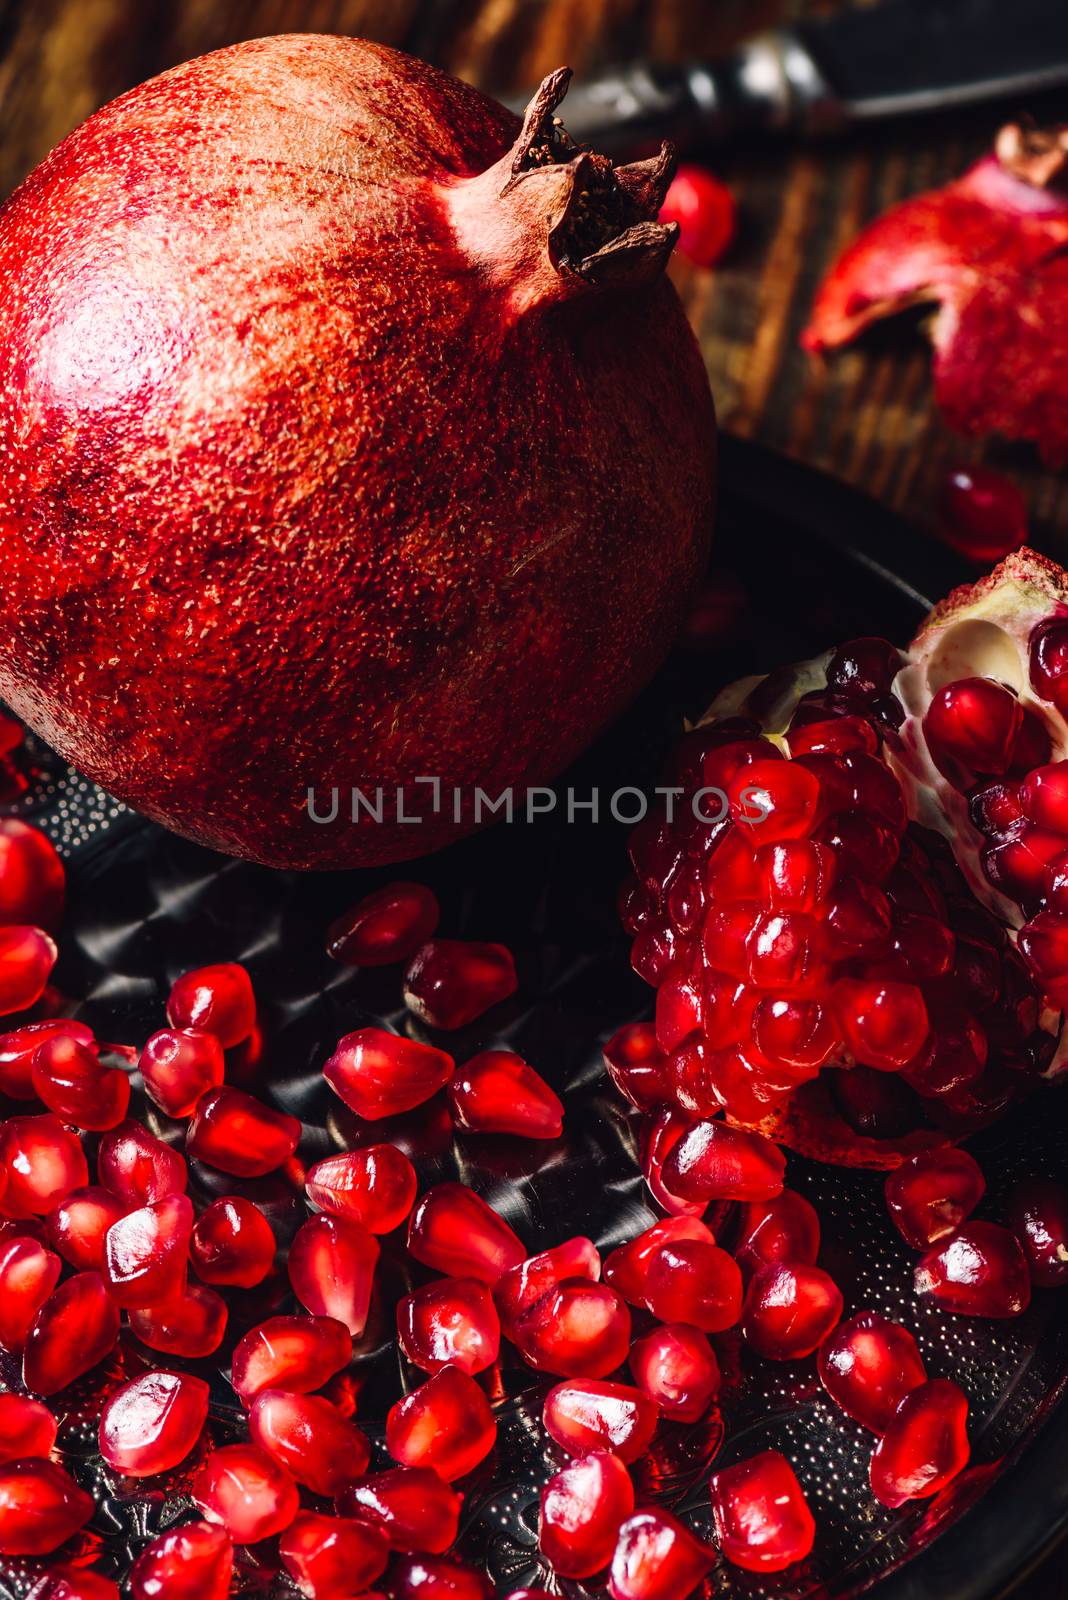 Whole Pomegranate and Opened One wiith Seeds on Metal Plate. Vertical Orientation.